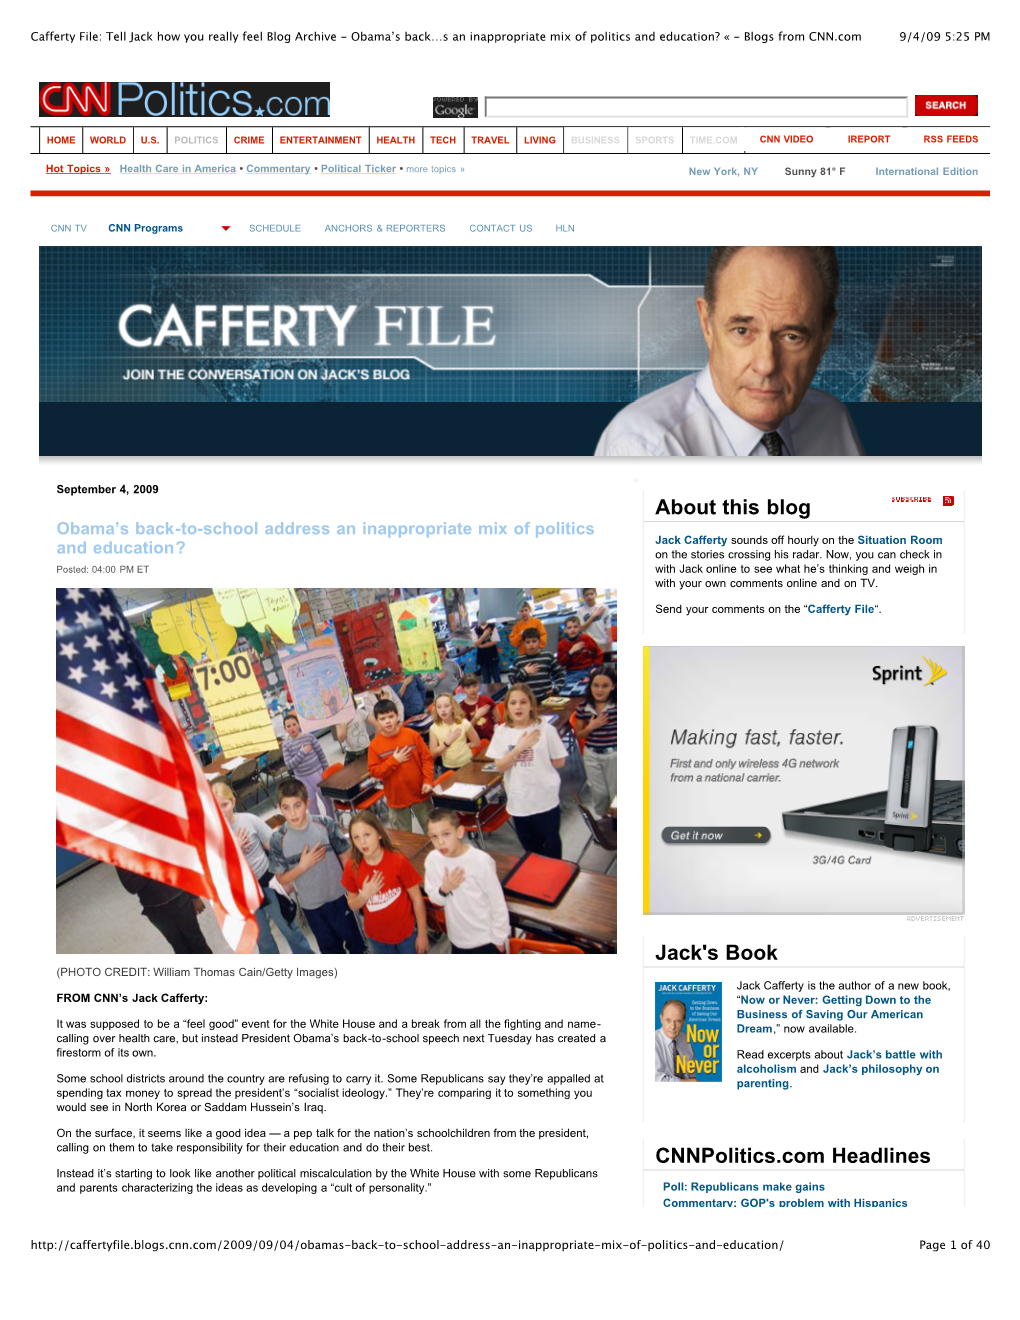 Cafferty File Tell Jack How You Really Feel Blog Archive